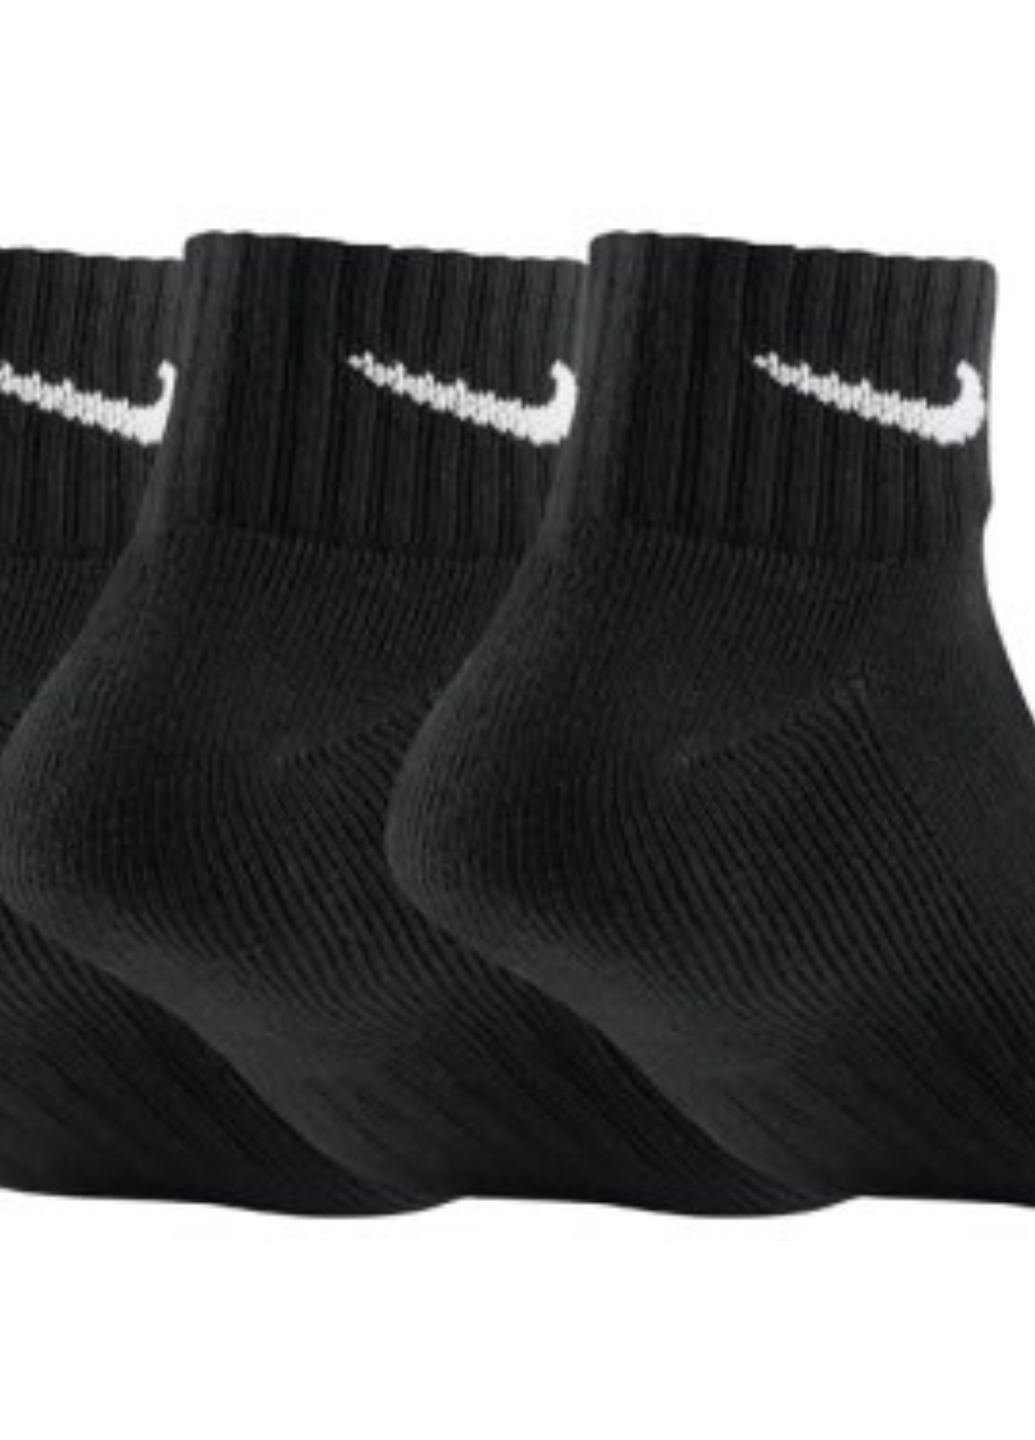 Носки SX4926-001_2024 (3 пары) Nike cushioned ankle (271676850)